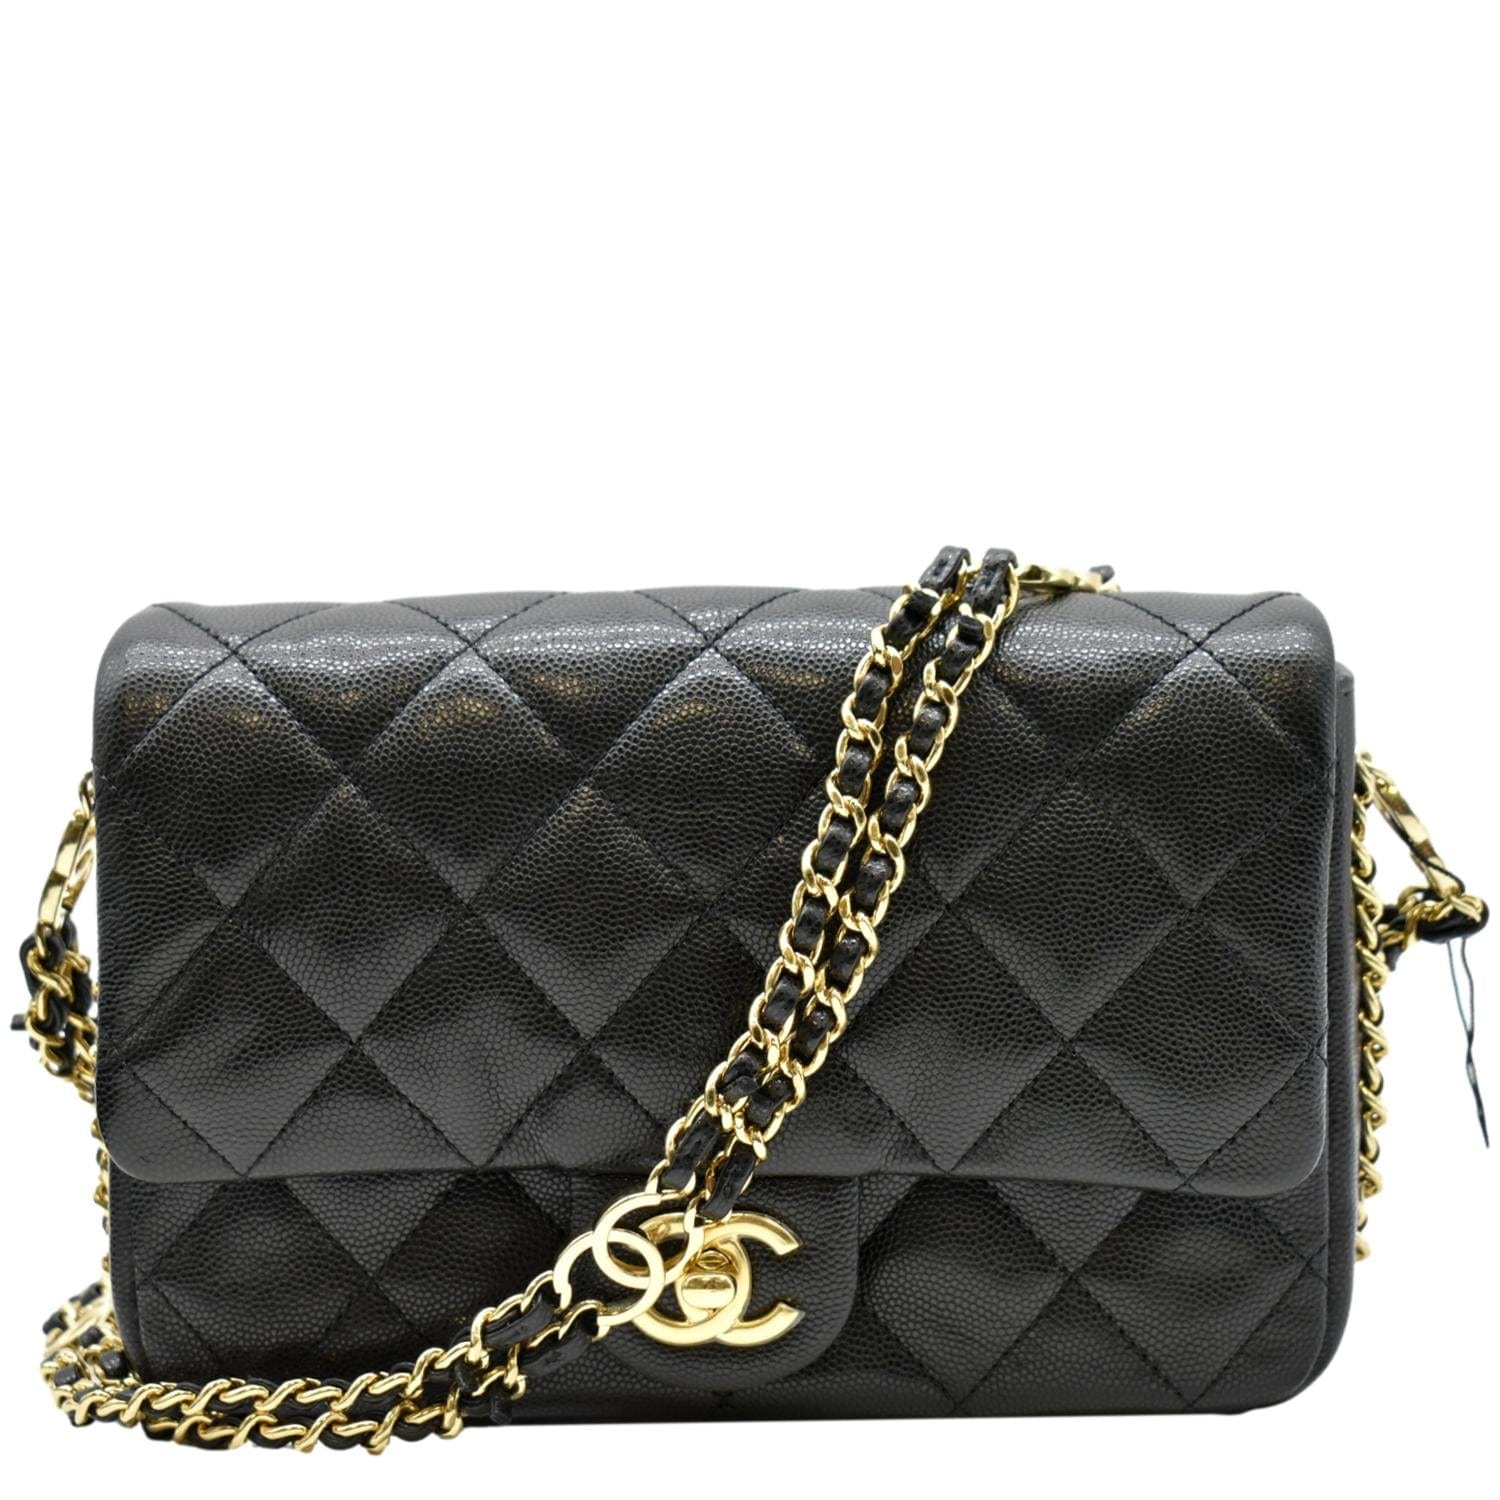 Chanel Leather Grained Calfskin Large Classic Double Flap Shoulder